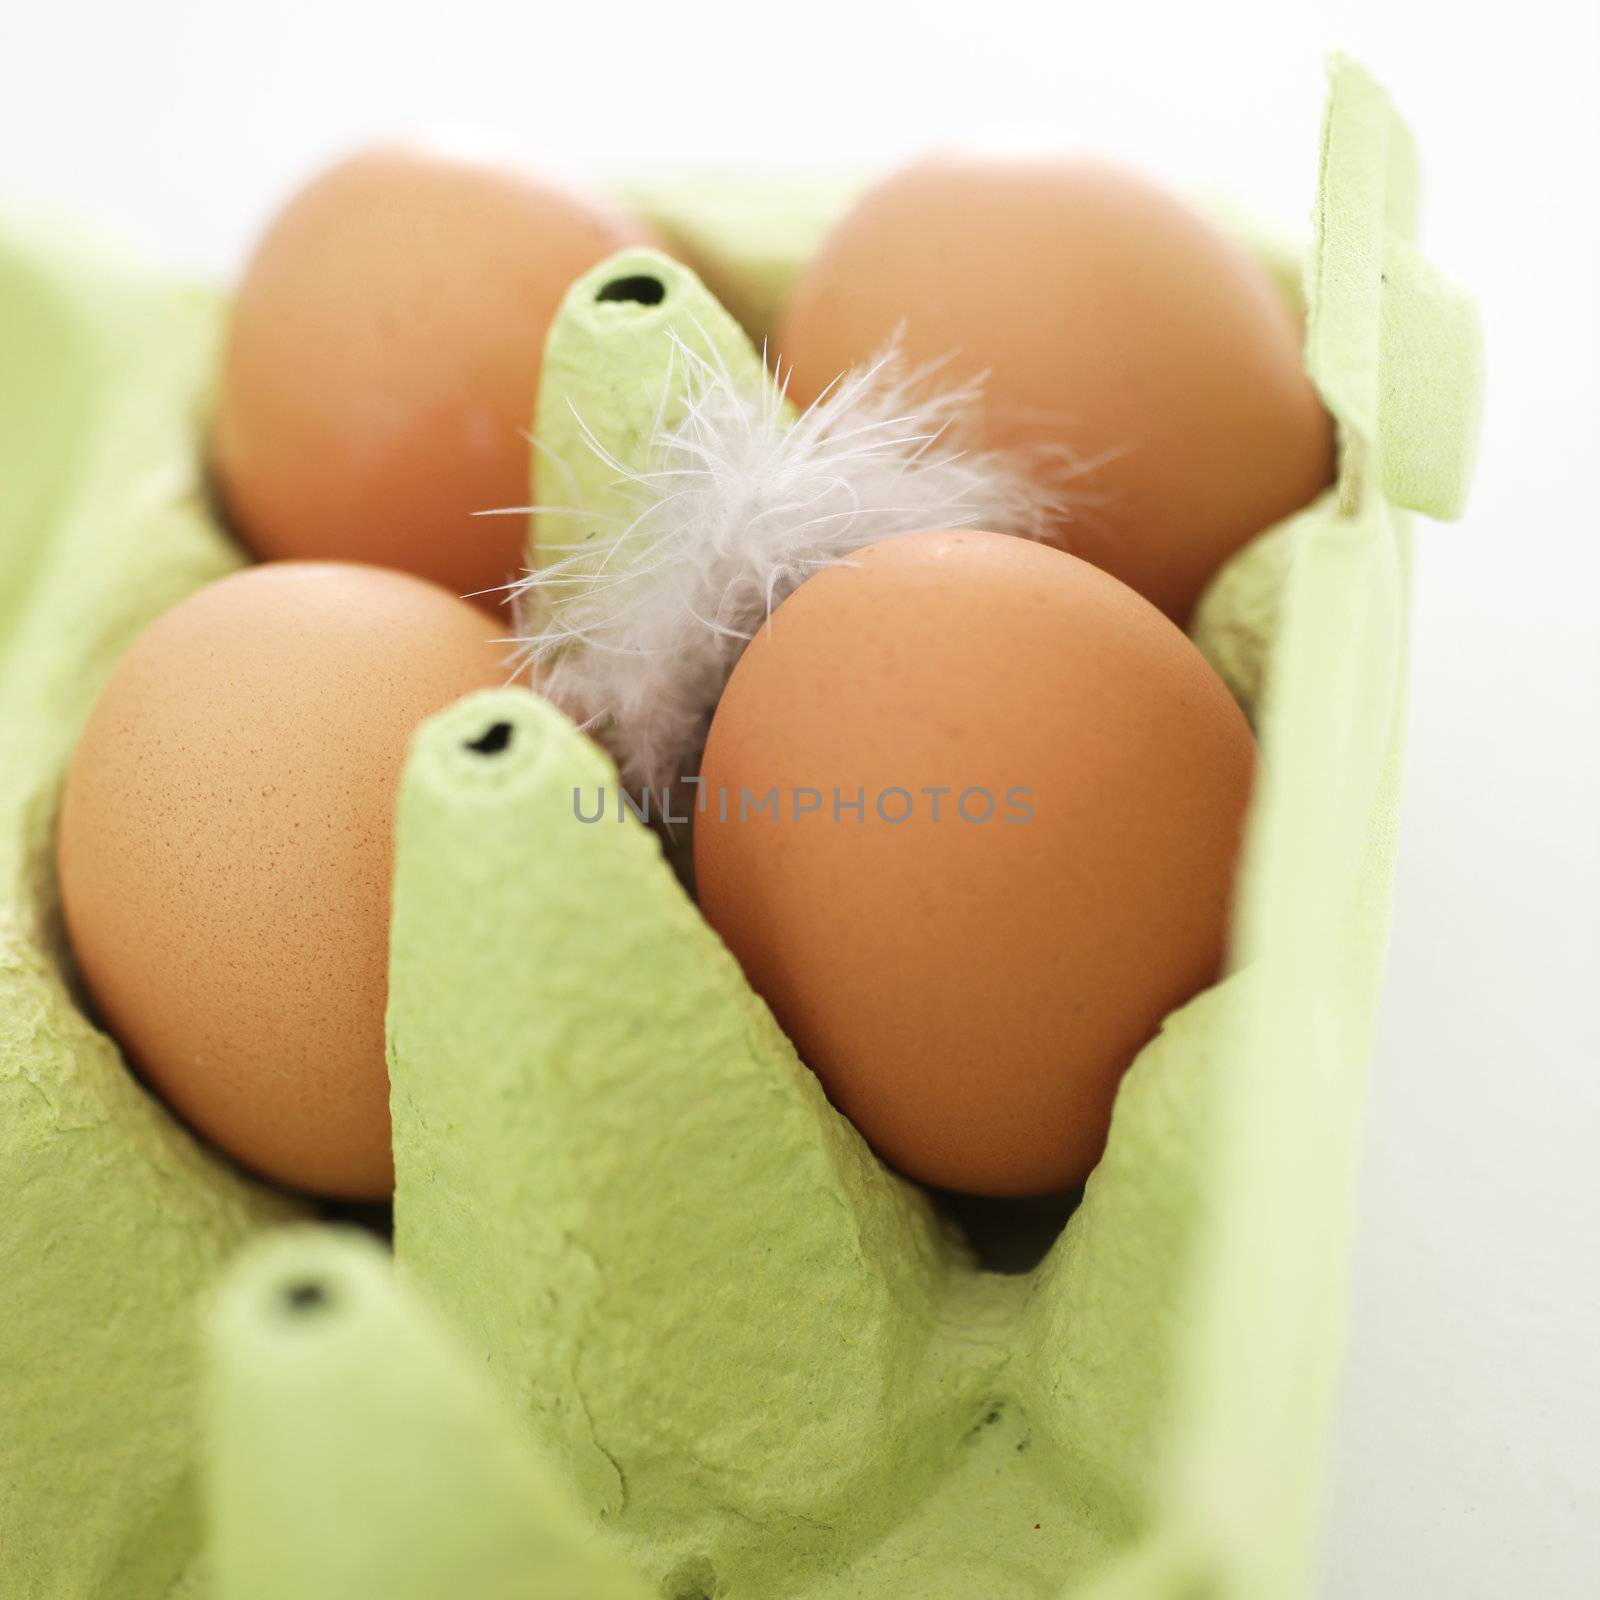 Cardboard carton with eggs and a feather by Farina6000